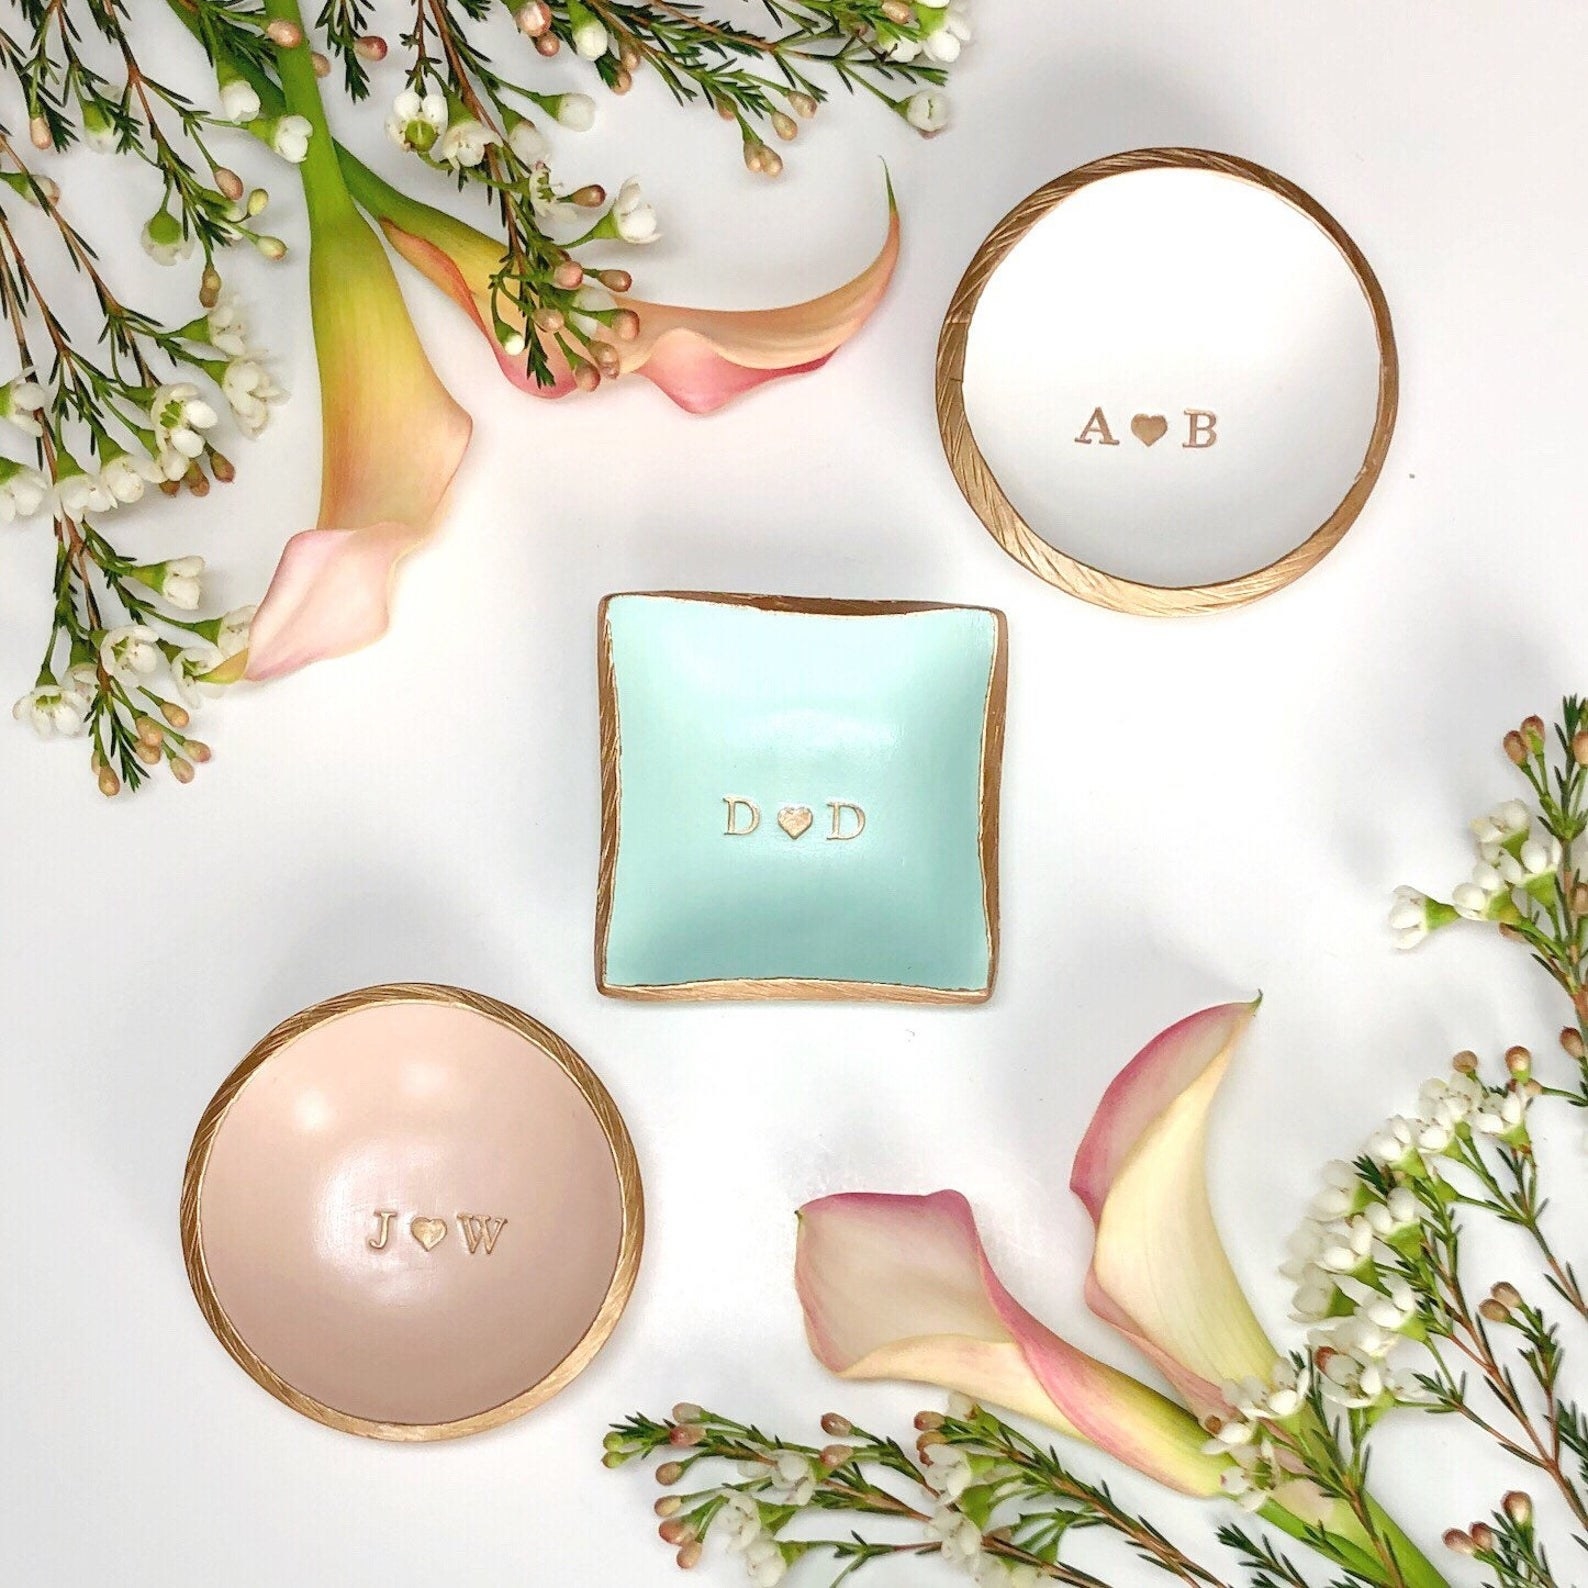 Three jewelry dishes in circle and square shapes and in pink, blue, and white